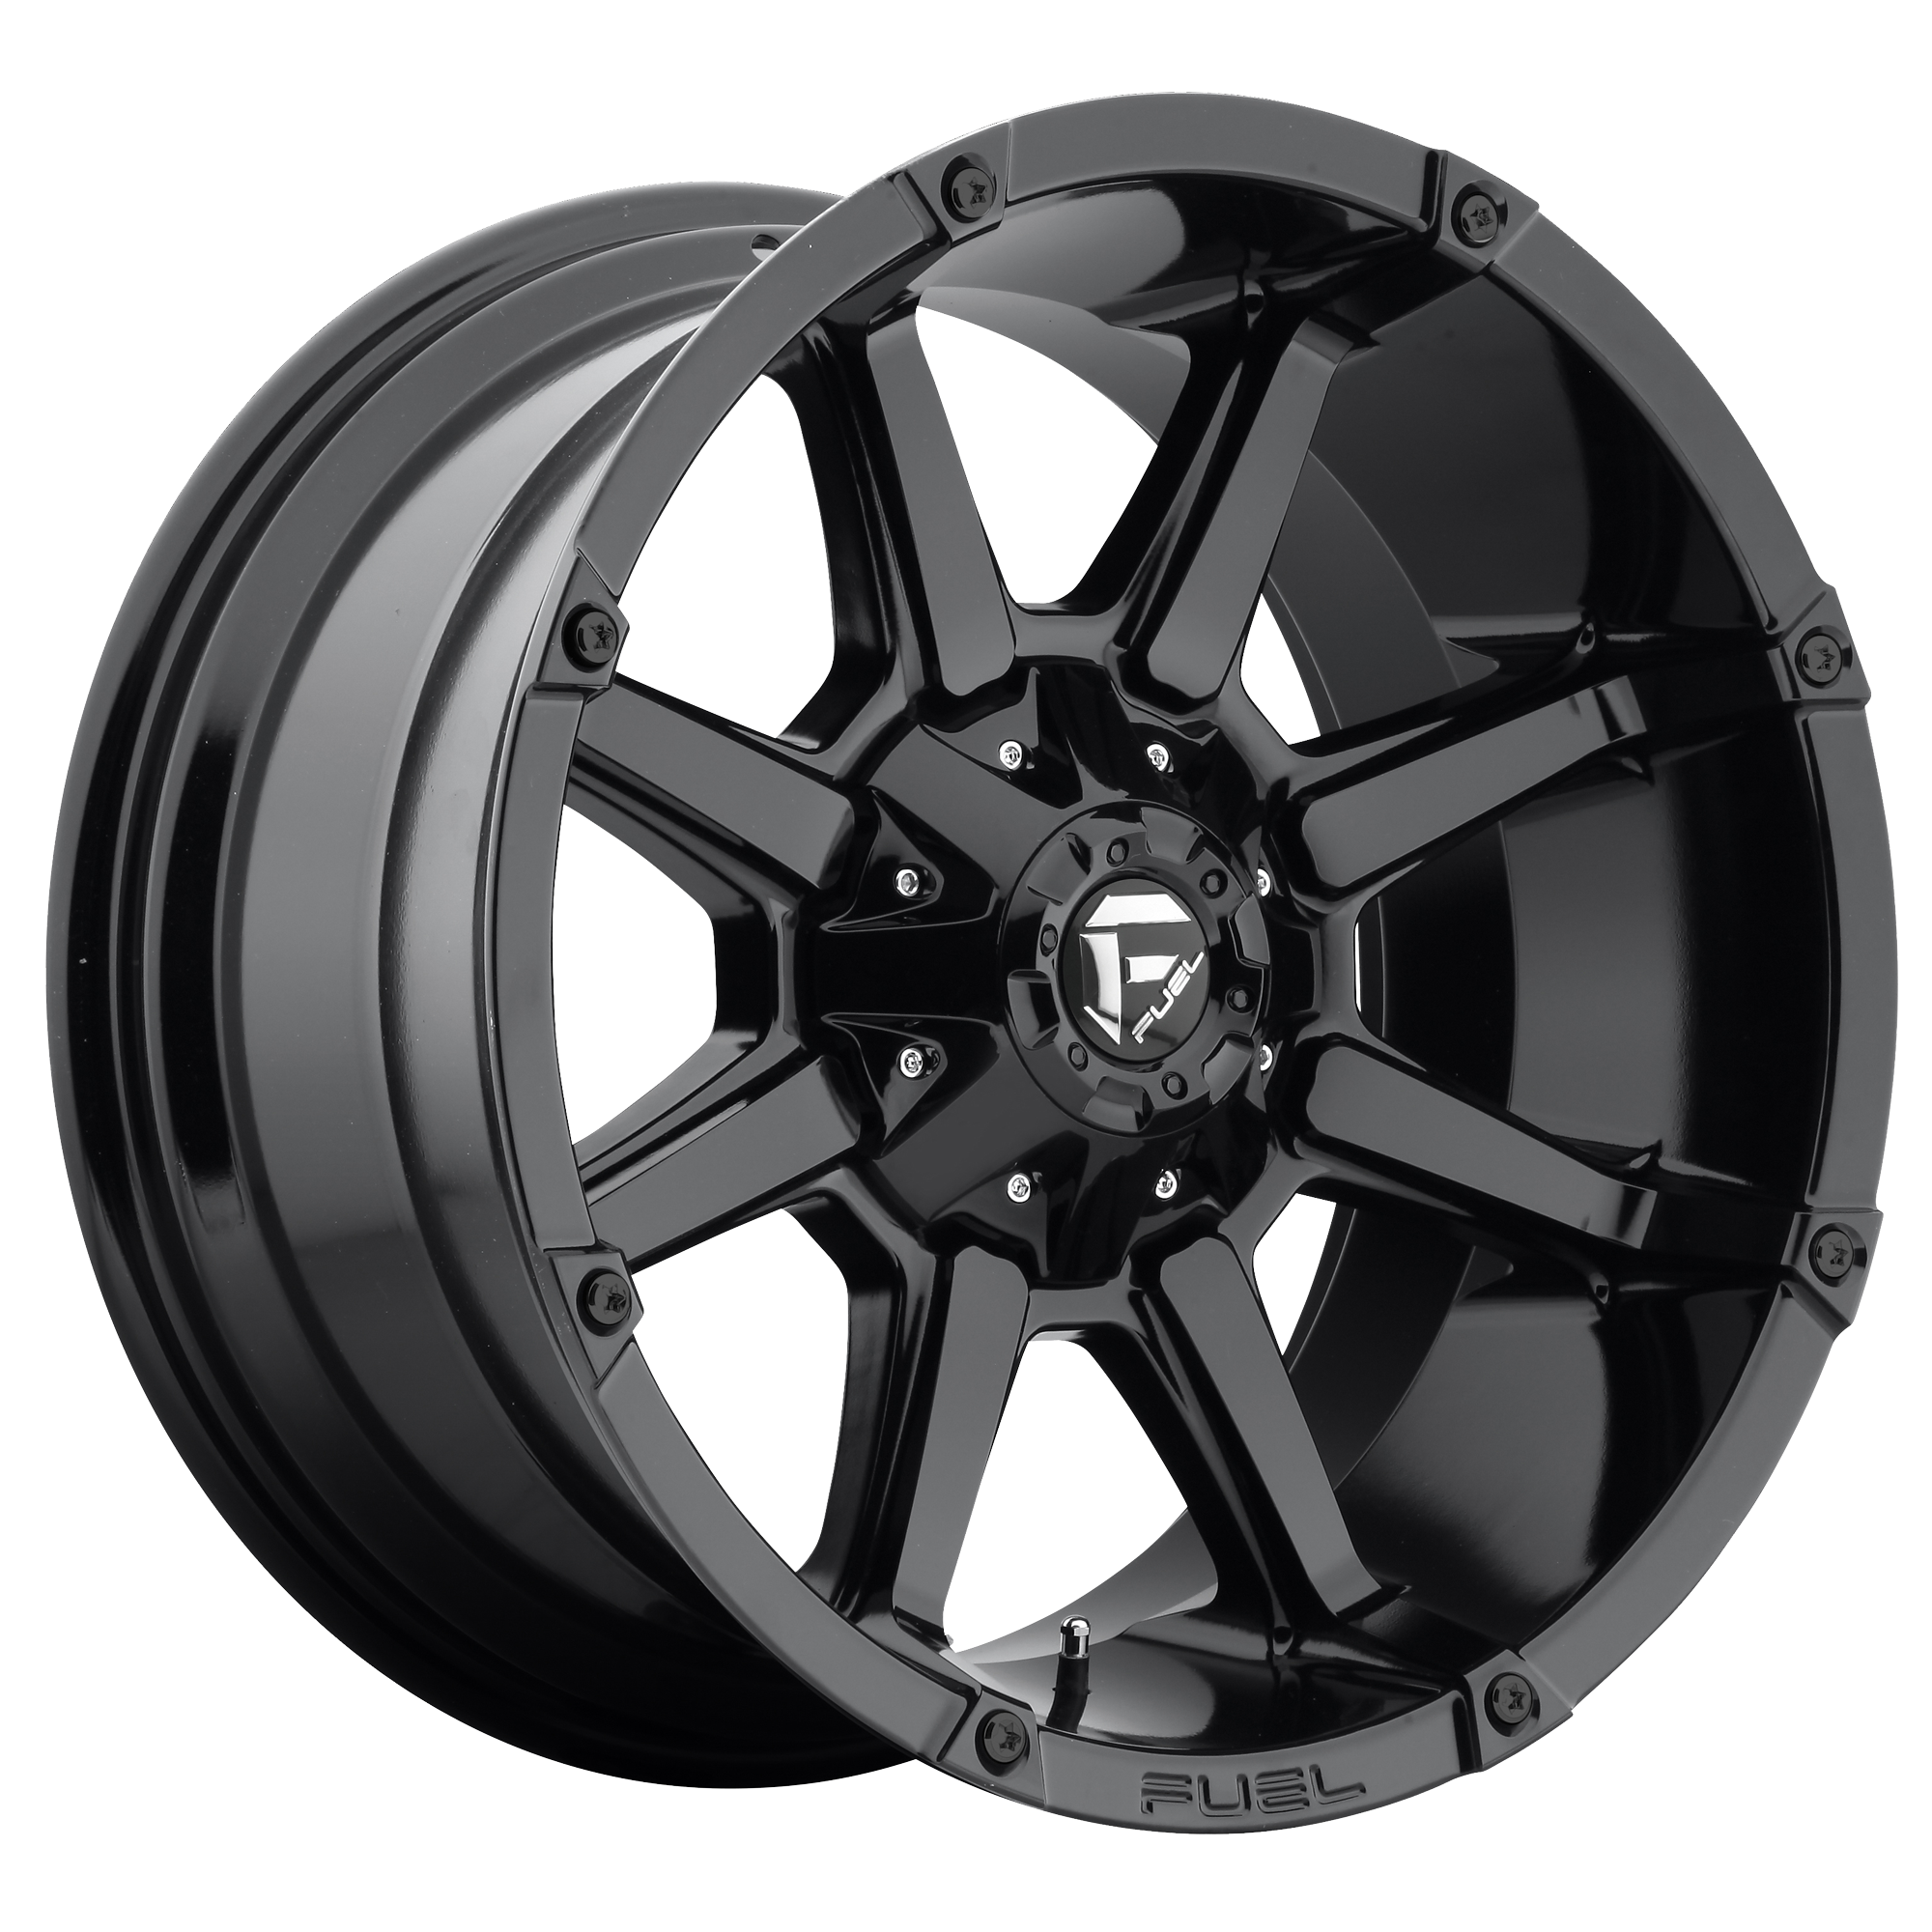 COUPLER 20x9 6x120.00/6x139.70 GLOSS BLACK (19 mm) - Tires and Engine Performance